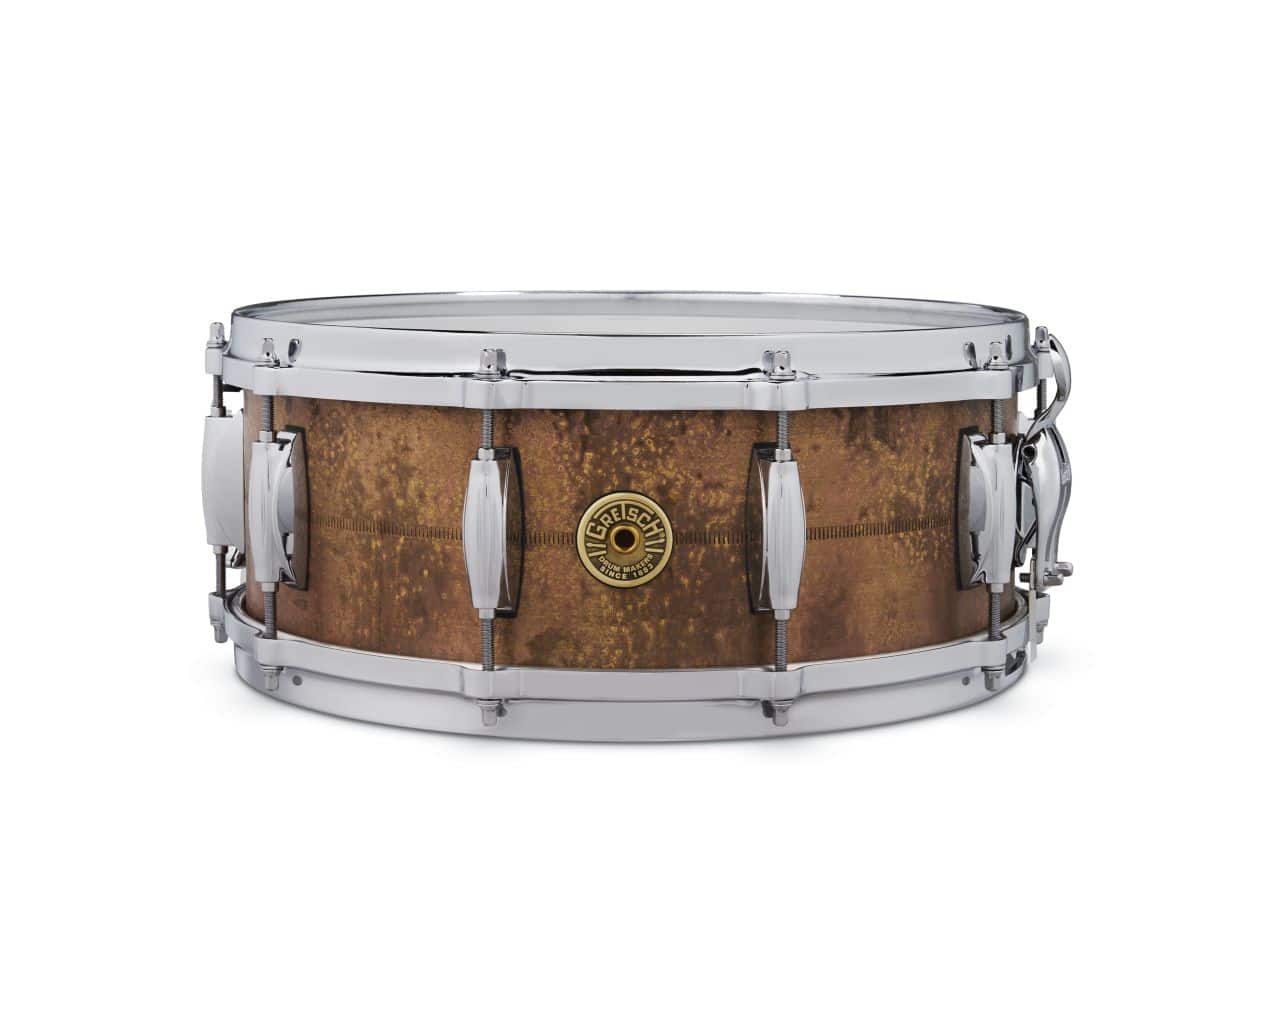 GRETSCH DRUMS SNARE DRUM USA KEITH CARLOCK SIGNATURE 14